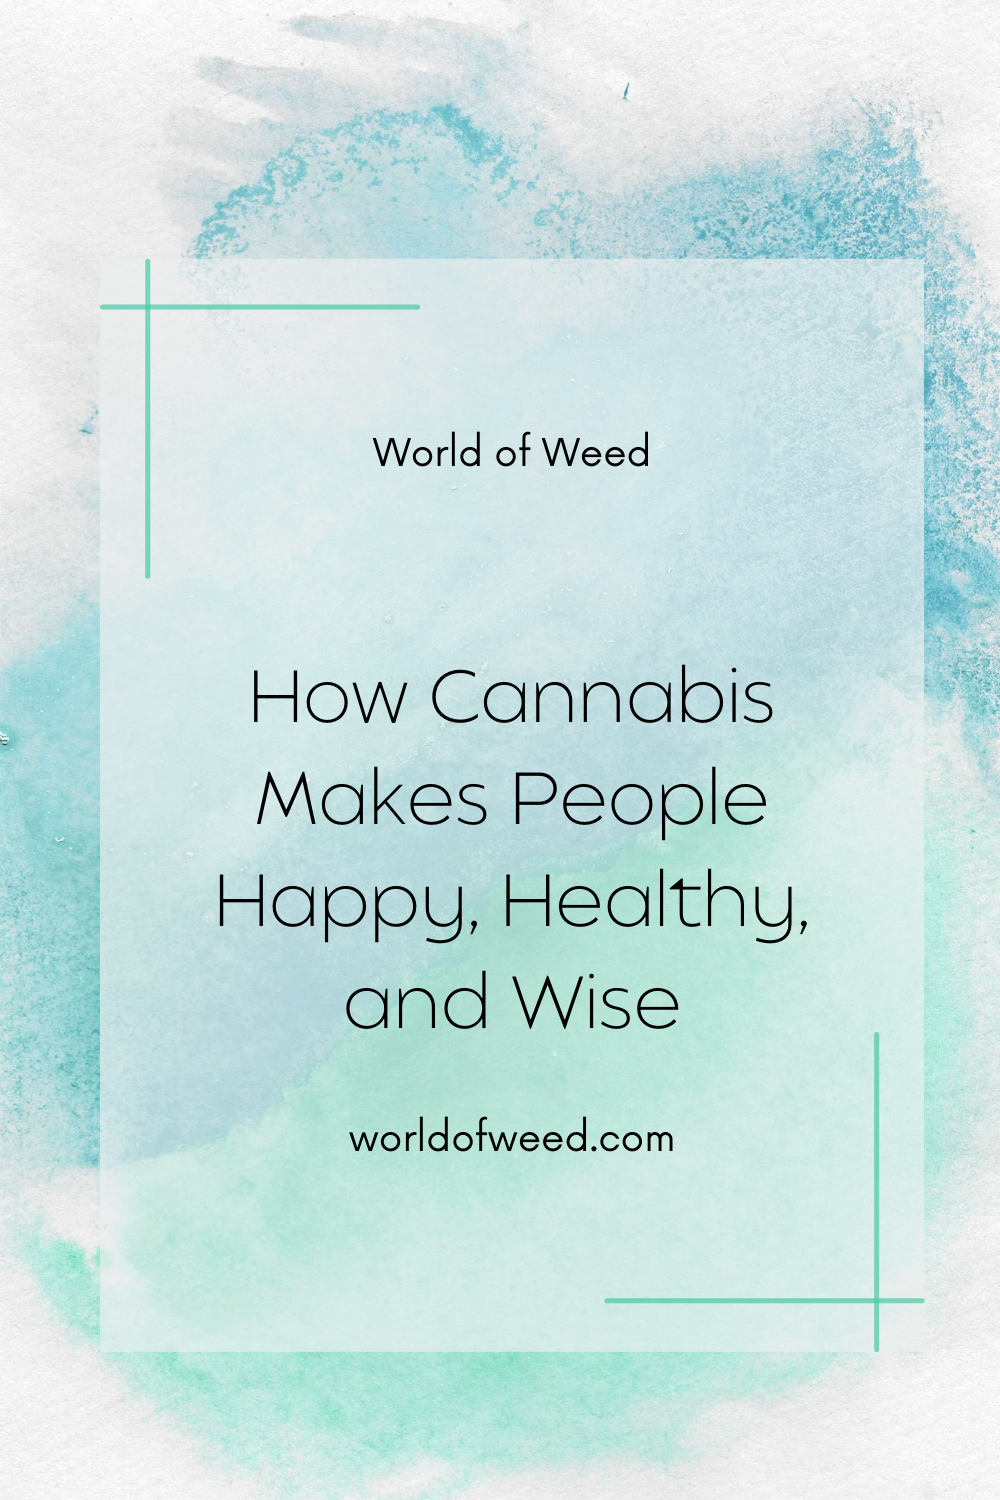 How Cannabis Makes People Happy, Healthy, and Wise